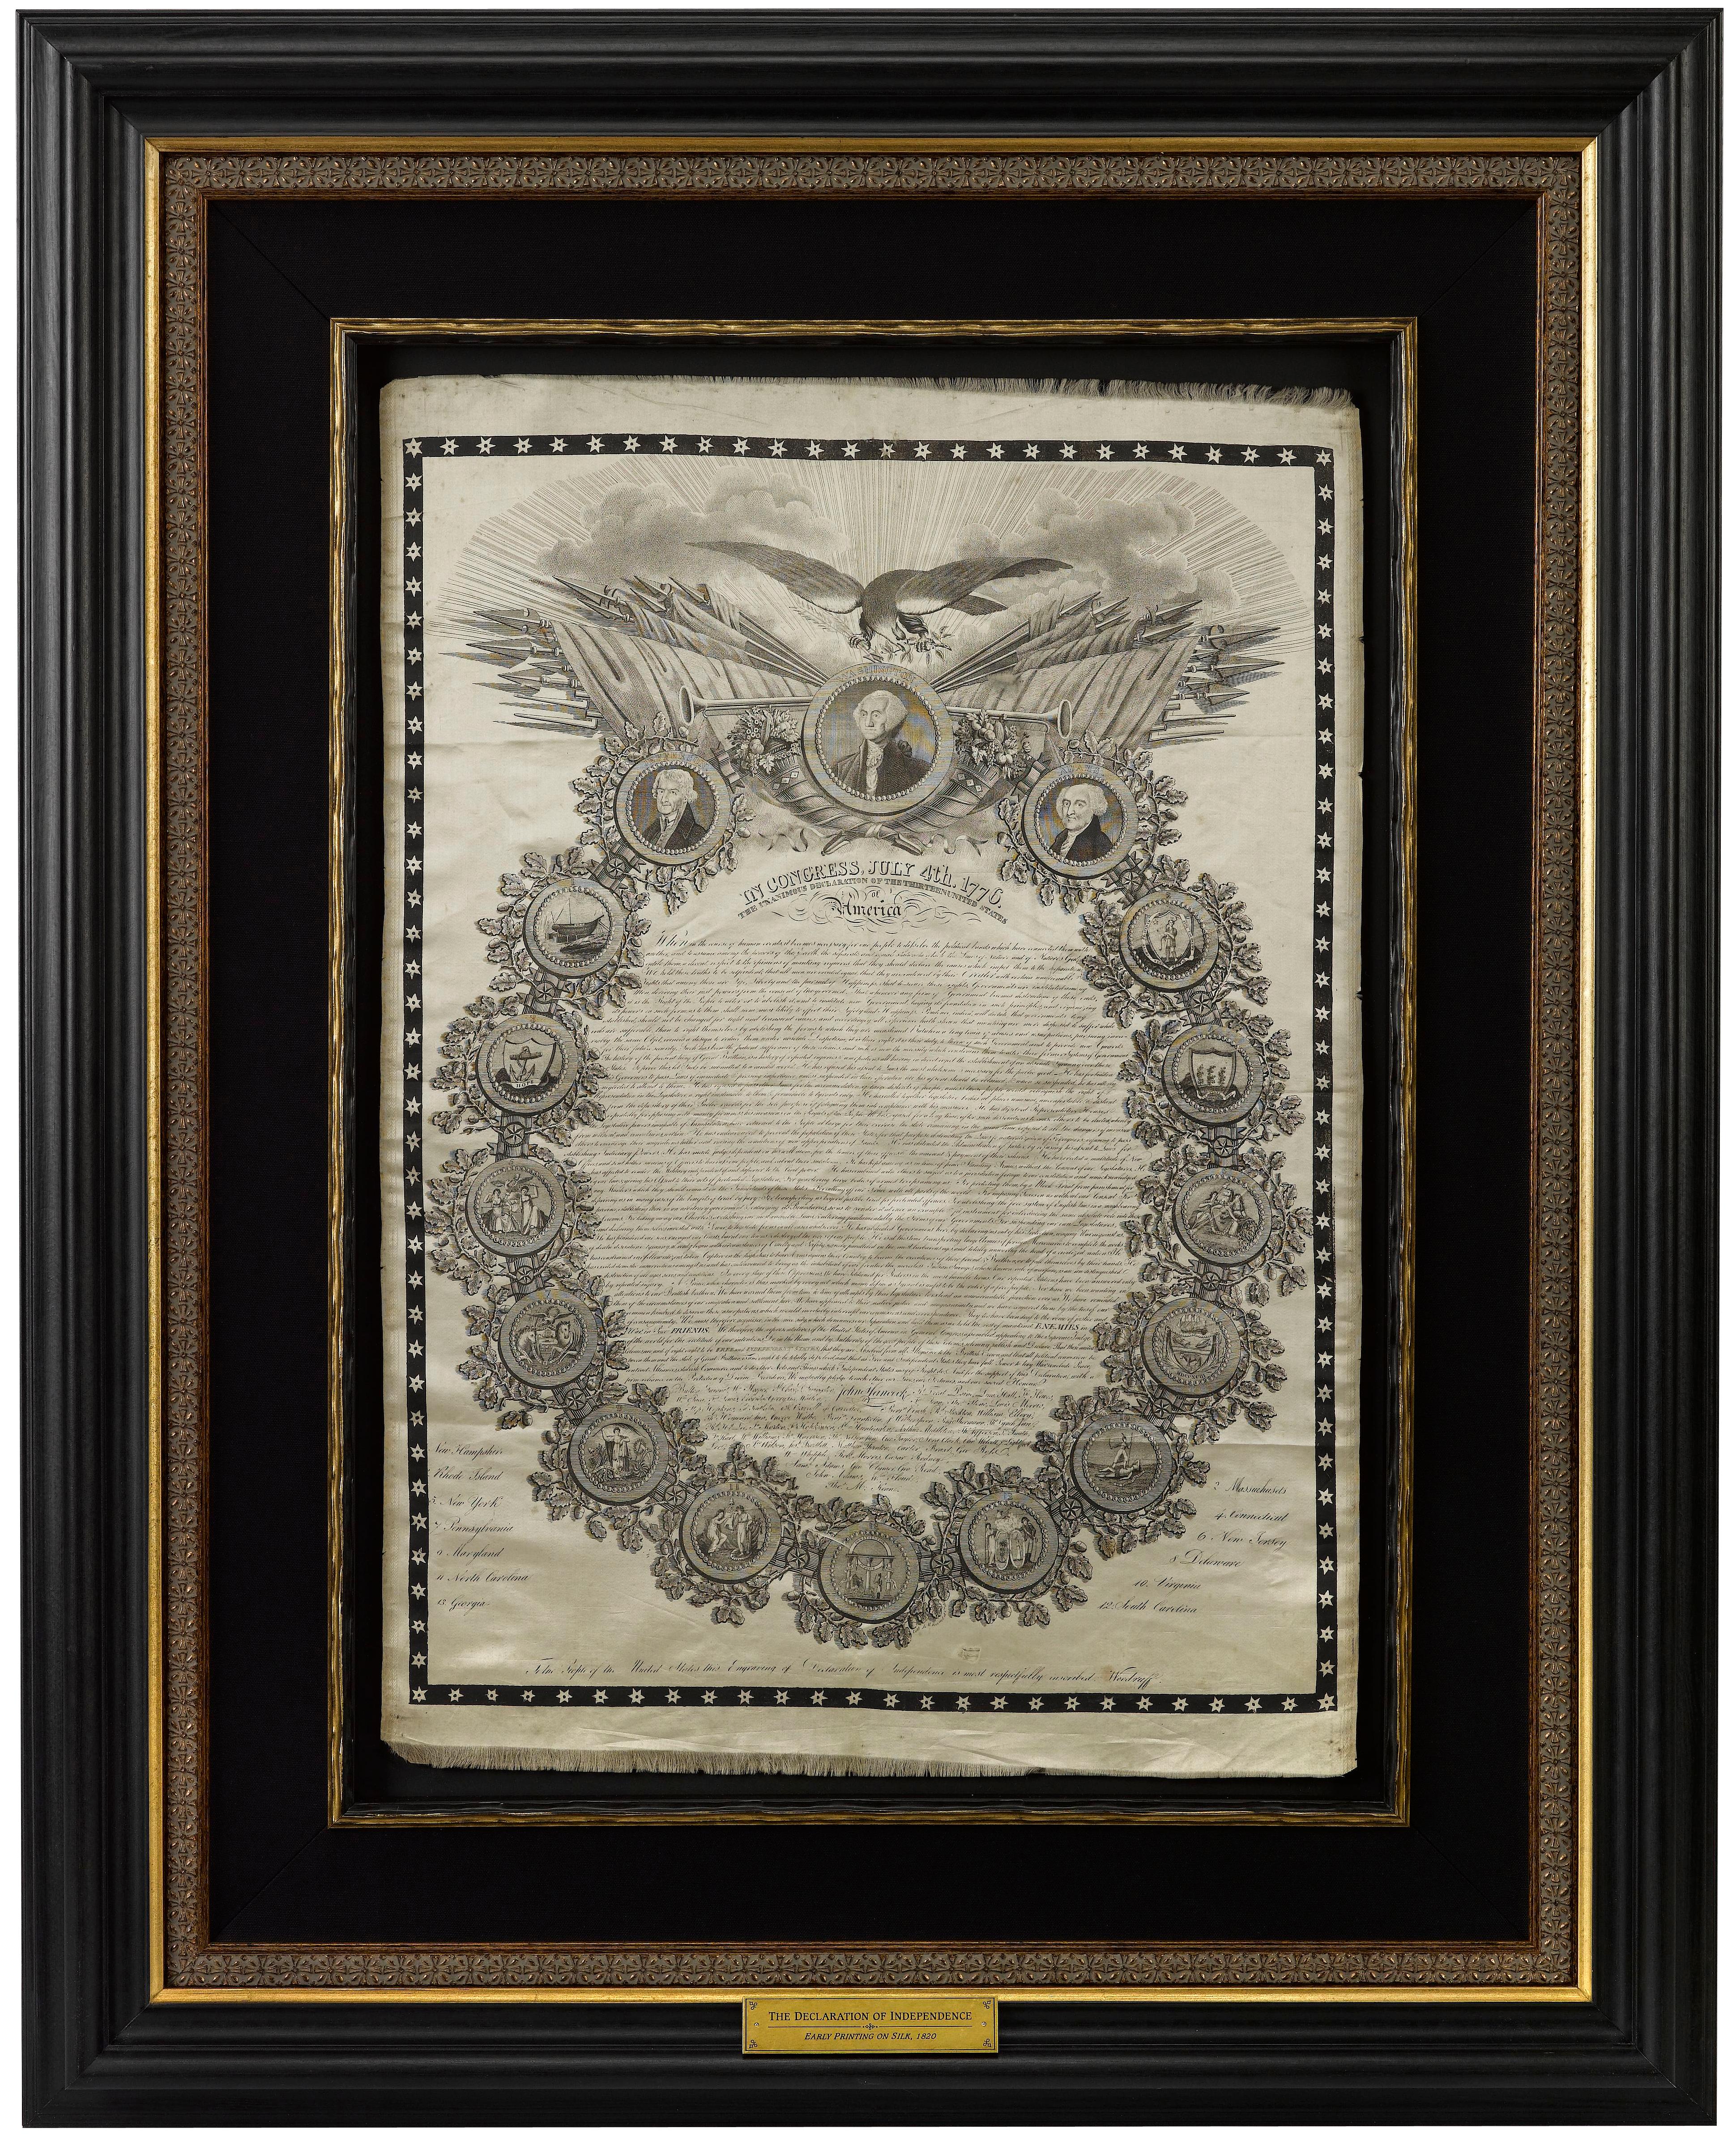 Presented is a rare and magnificent early printing of the Declaration of Independence on silk. The silk broadside was made by H. Brunet, in Lyon, France specifically for the American market. The design was based on the 1819 engraving on paper by